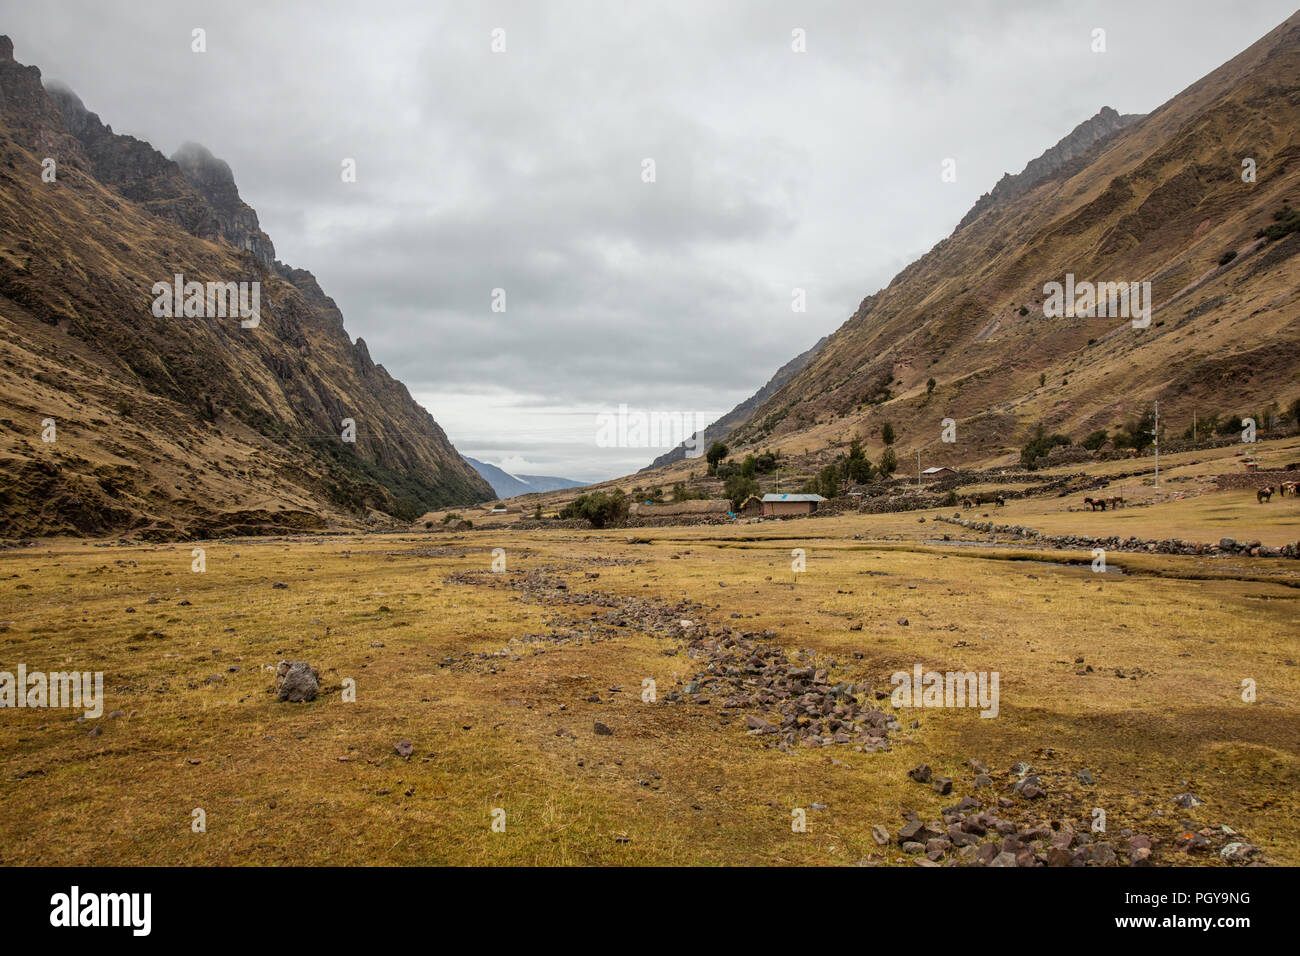 Cancha Cancha Village In the Lares Valley, along the Lares Trek, near Cusco and Machu Picchu, Peru Stock Photo